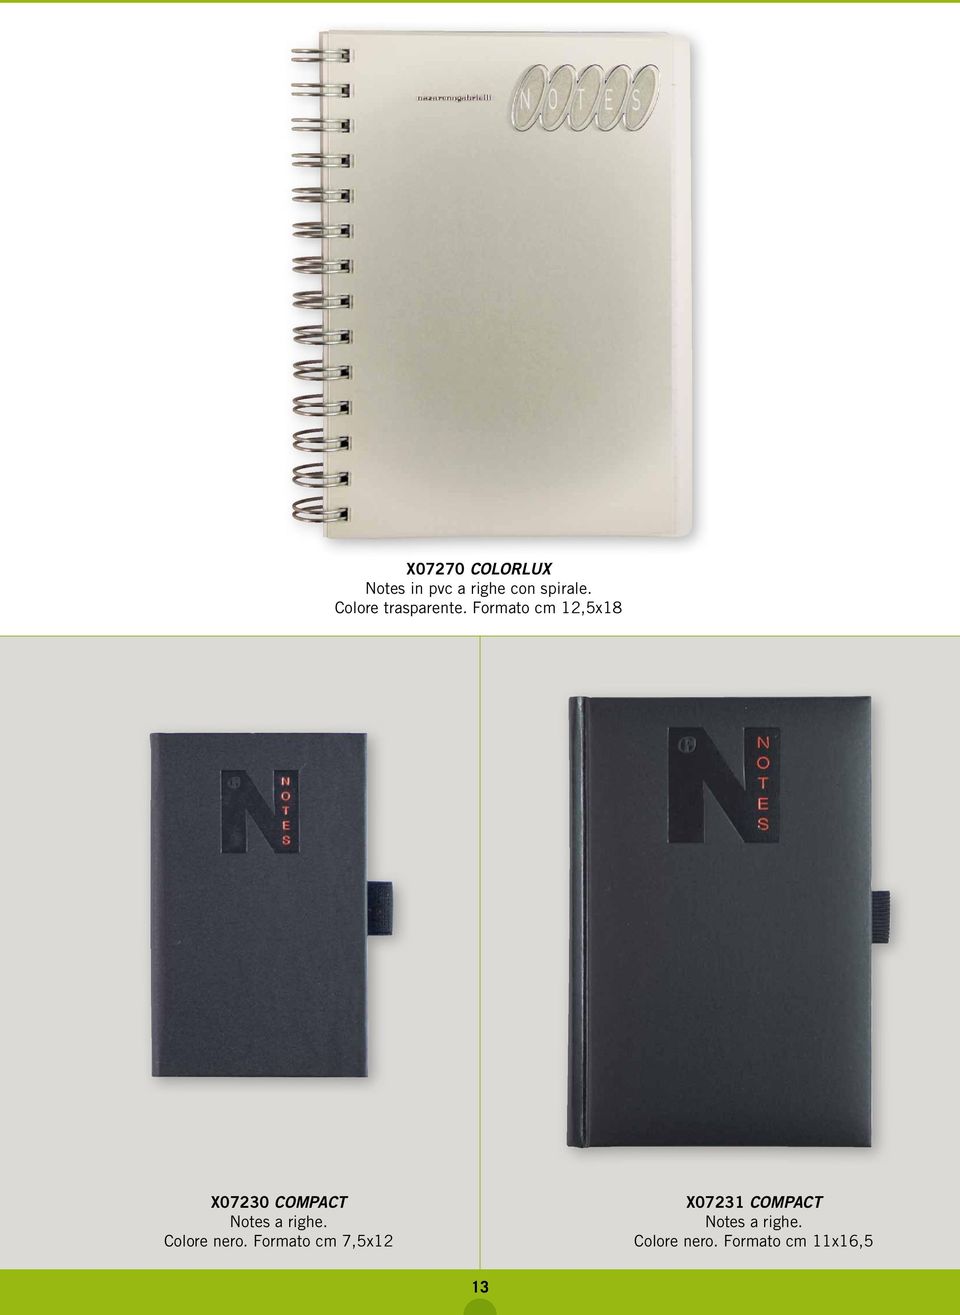 Formato cm 12,5x18 X07230 Compact Notes a righe.